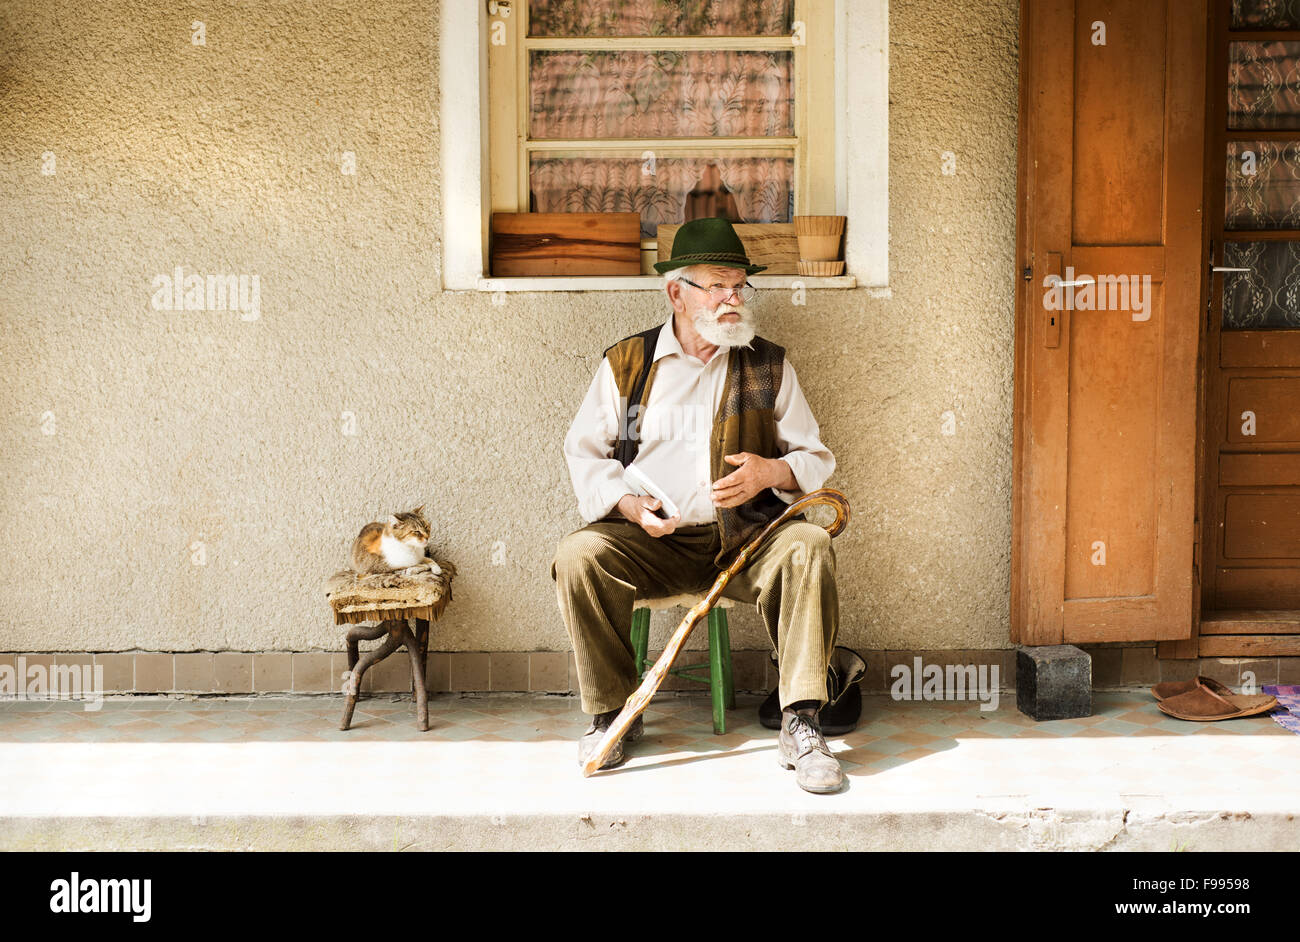 Old man reading the newspaper in front of his house Stock Photo